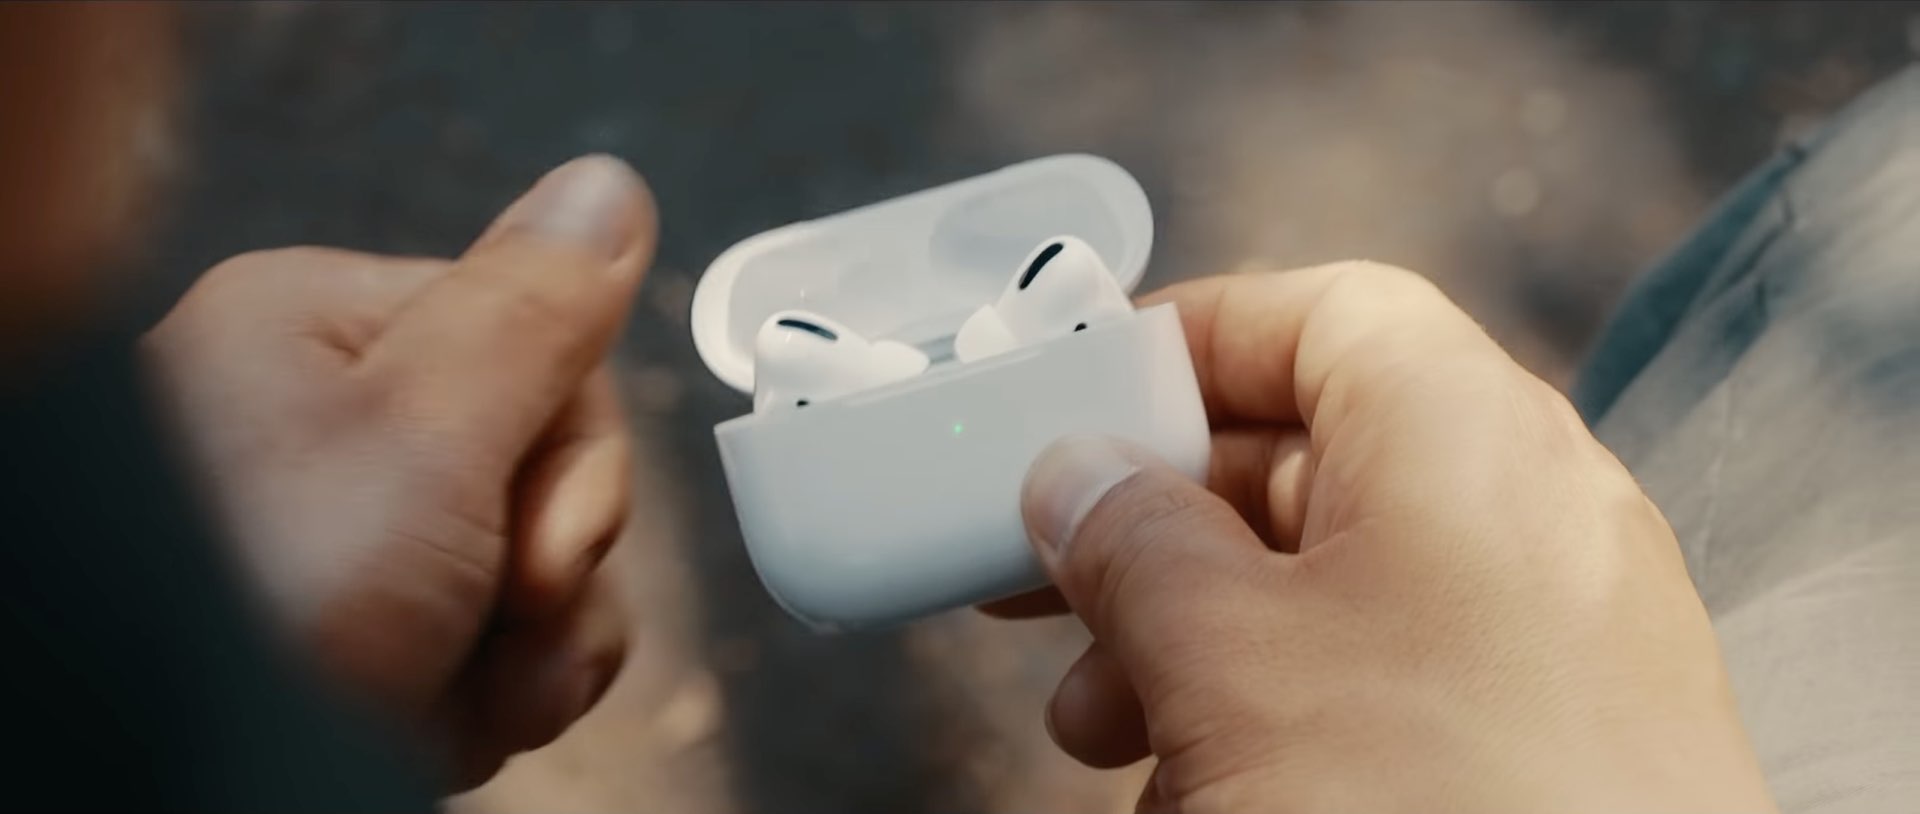 A still from Apple's ad showing a you man's hand holding an open AirPods Pro charge case with the earbuds inside